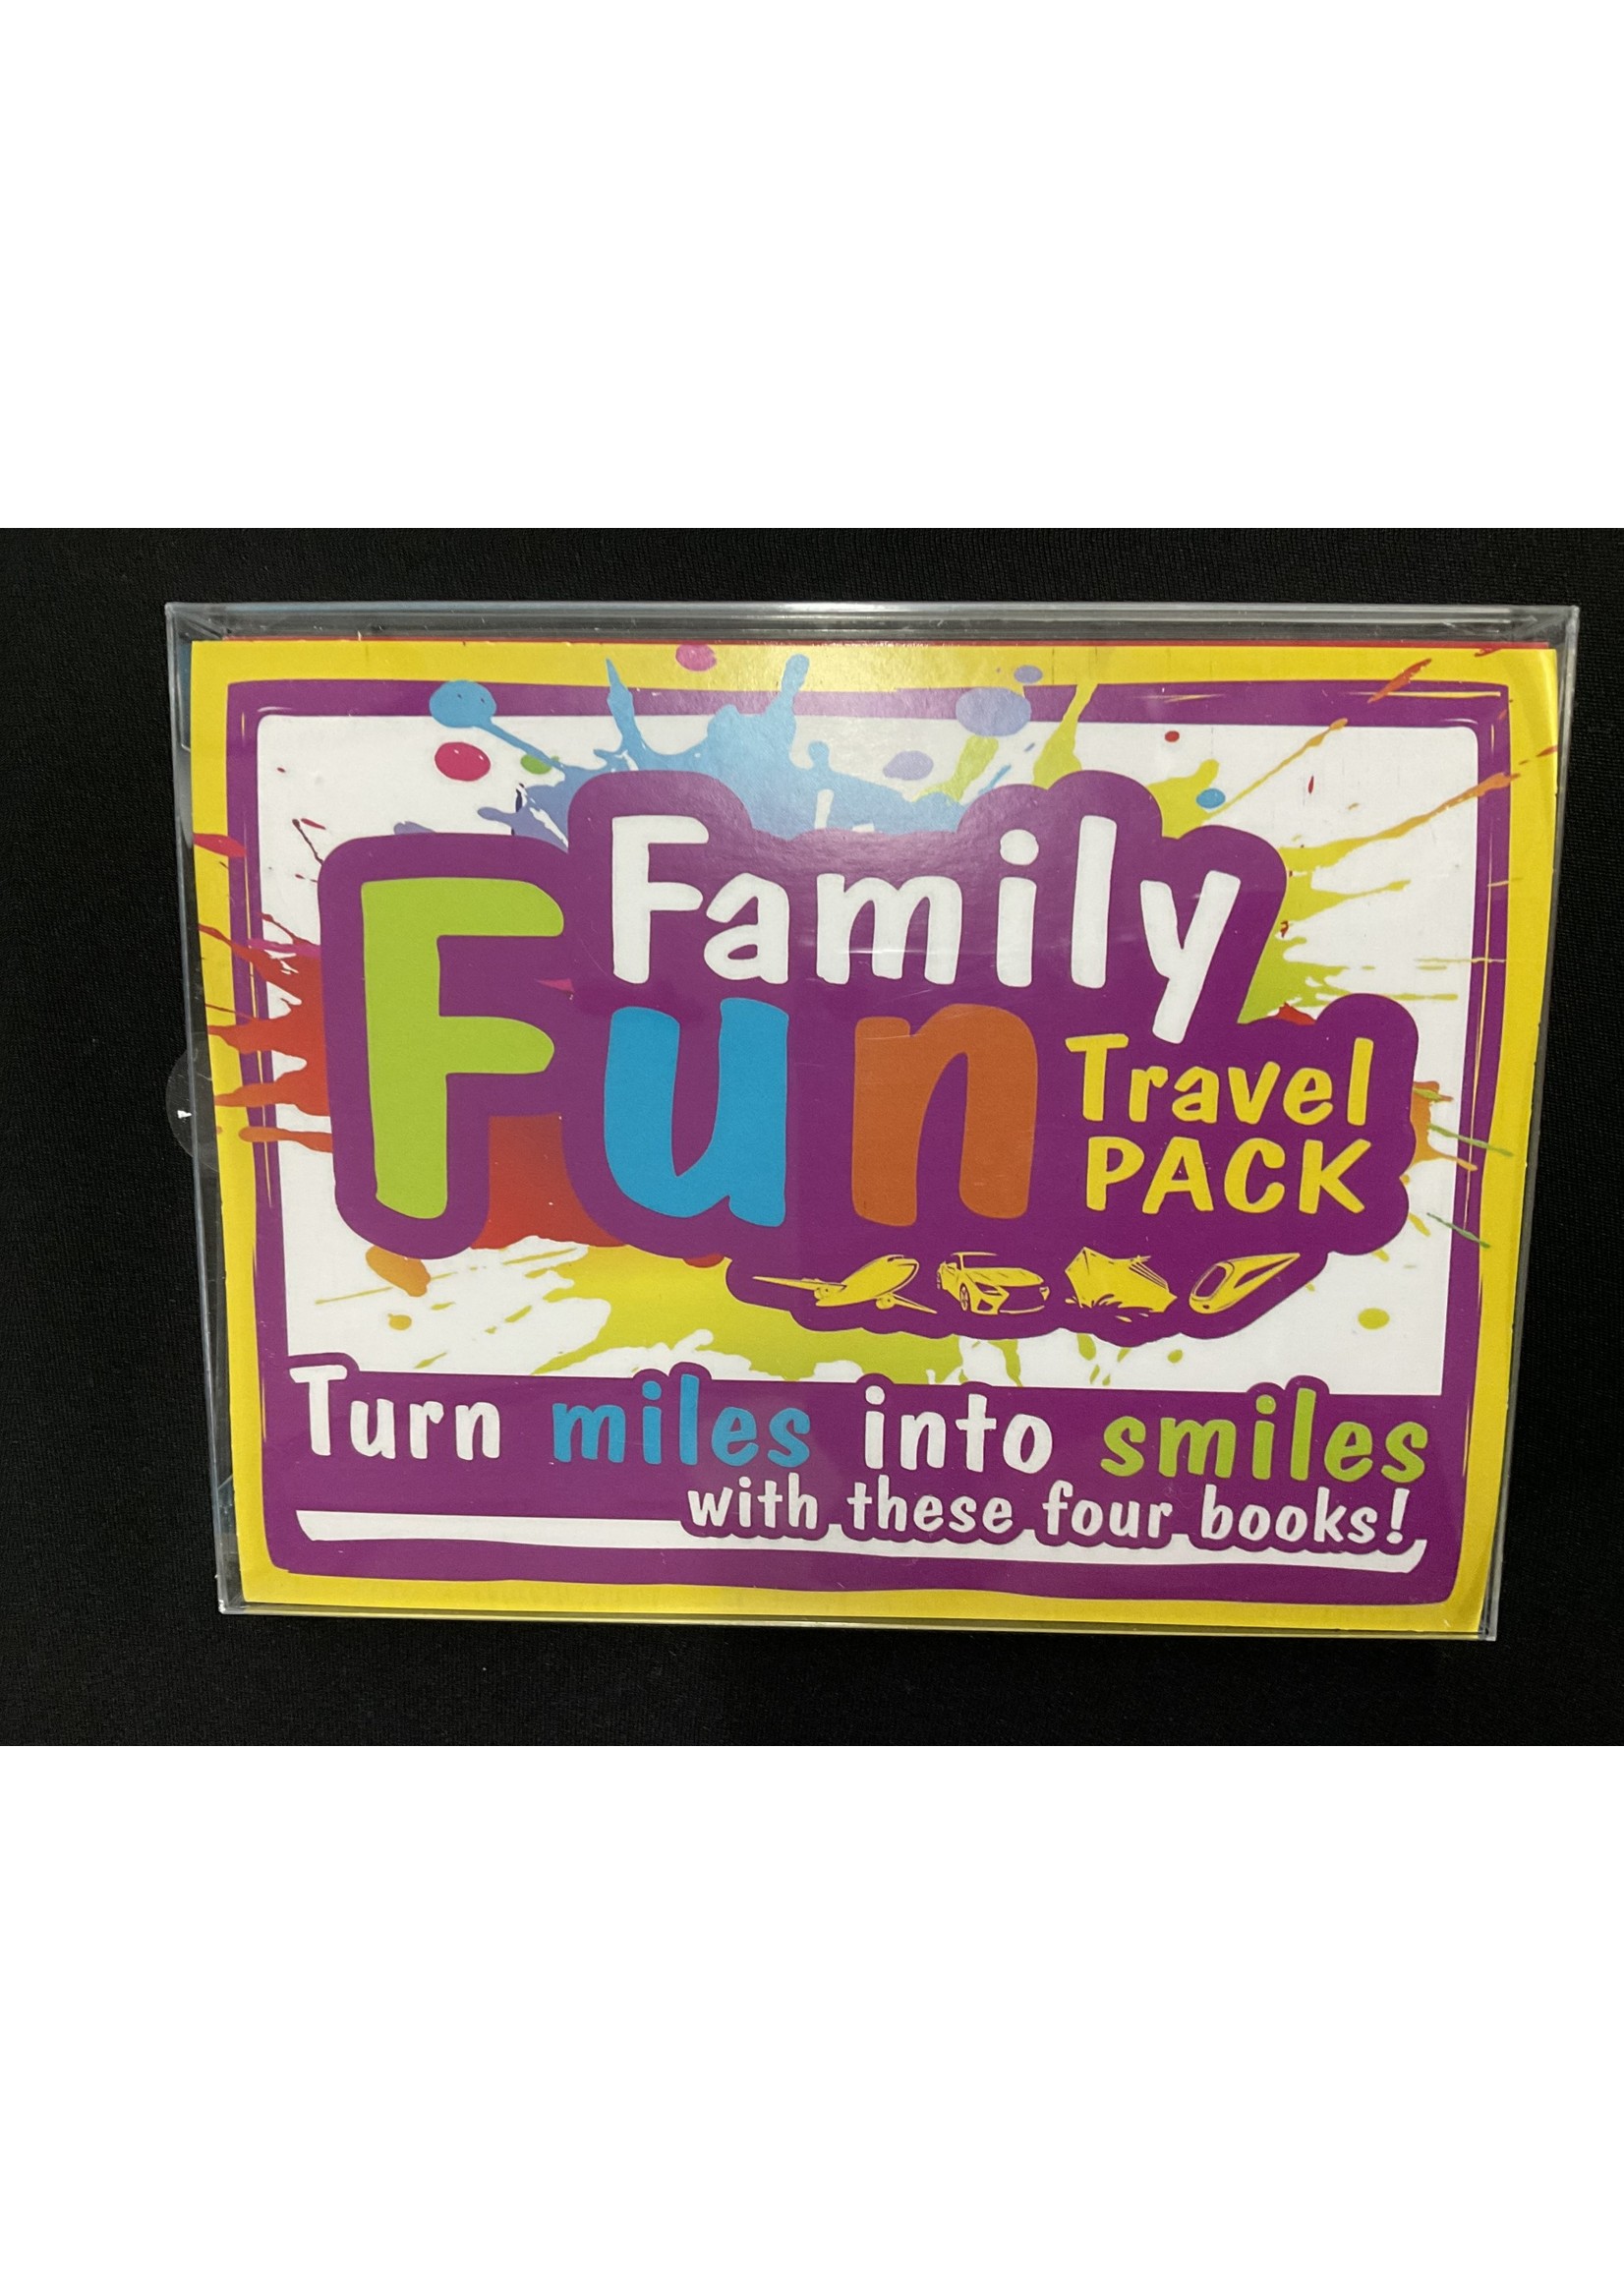 William Randall Publishing Family Fun Travel Pack: Turn Miles Into Smiles in Four Books